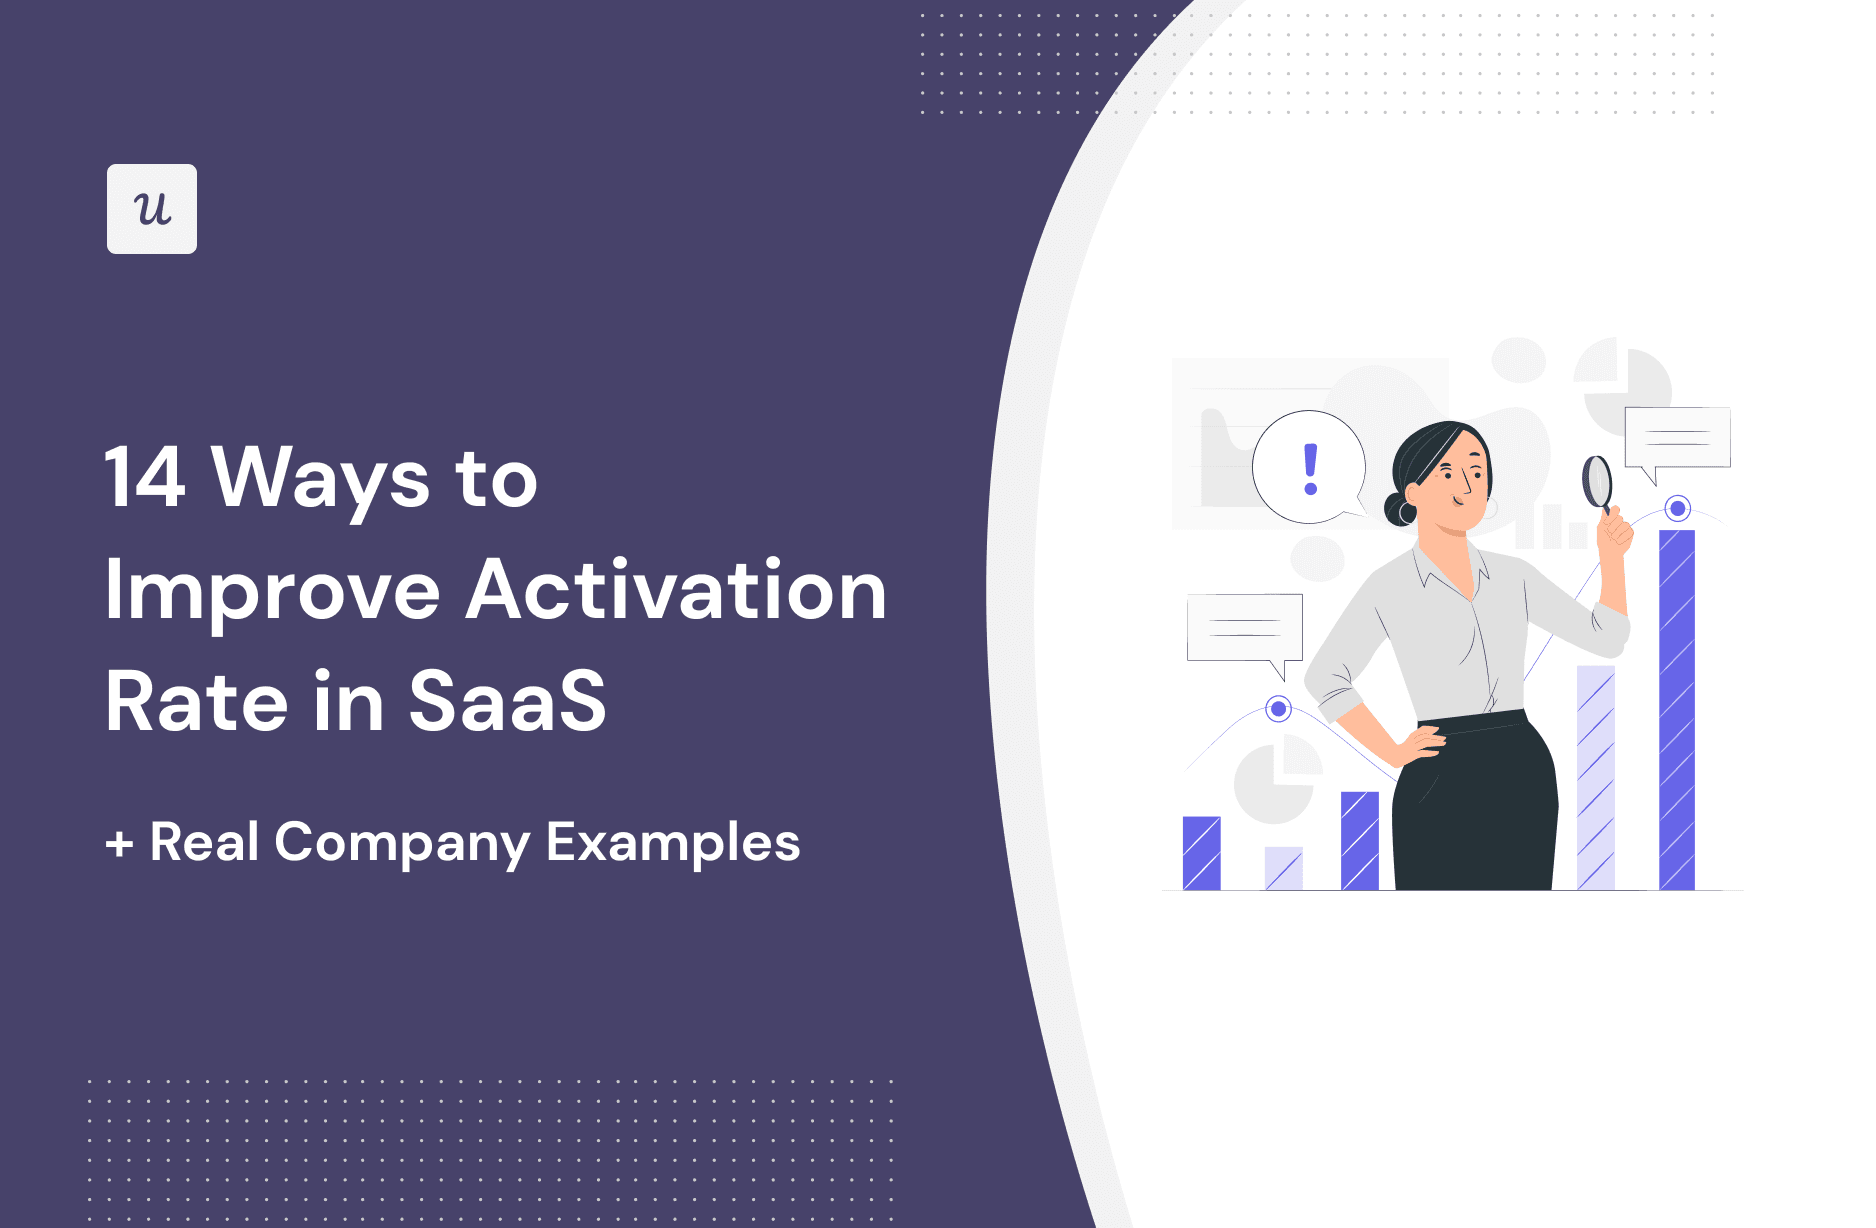 14 Ways to Improve Activation Rate in SaaS (+ Real Company Examples) cover